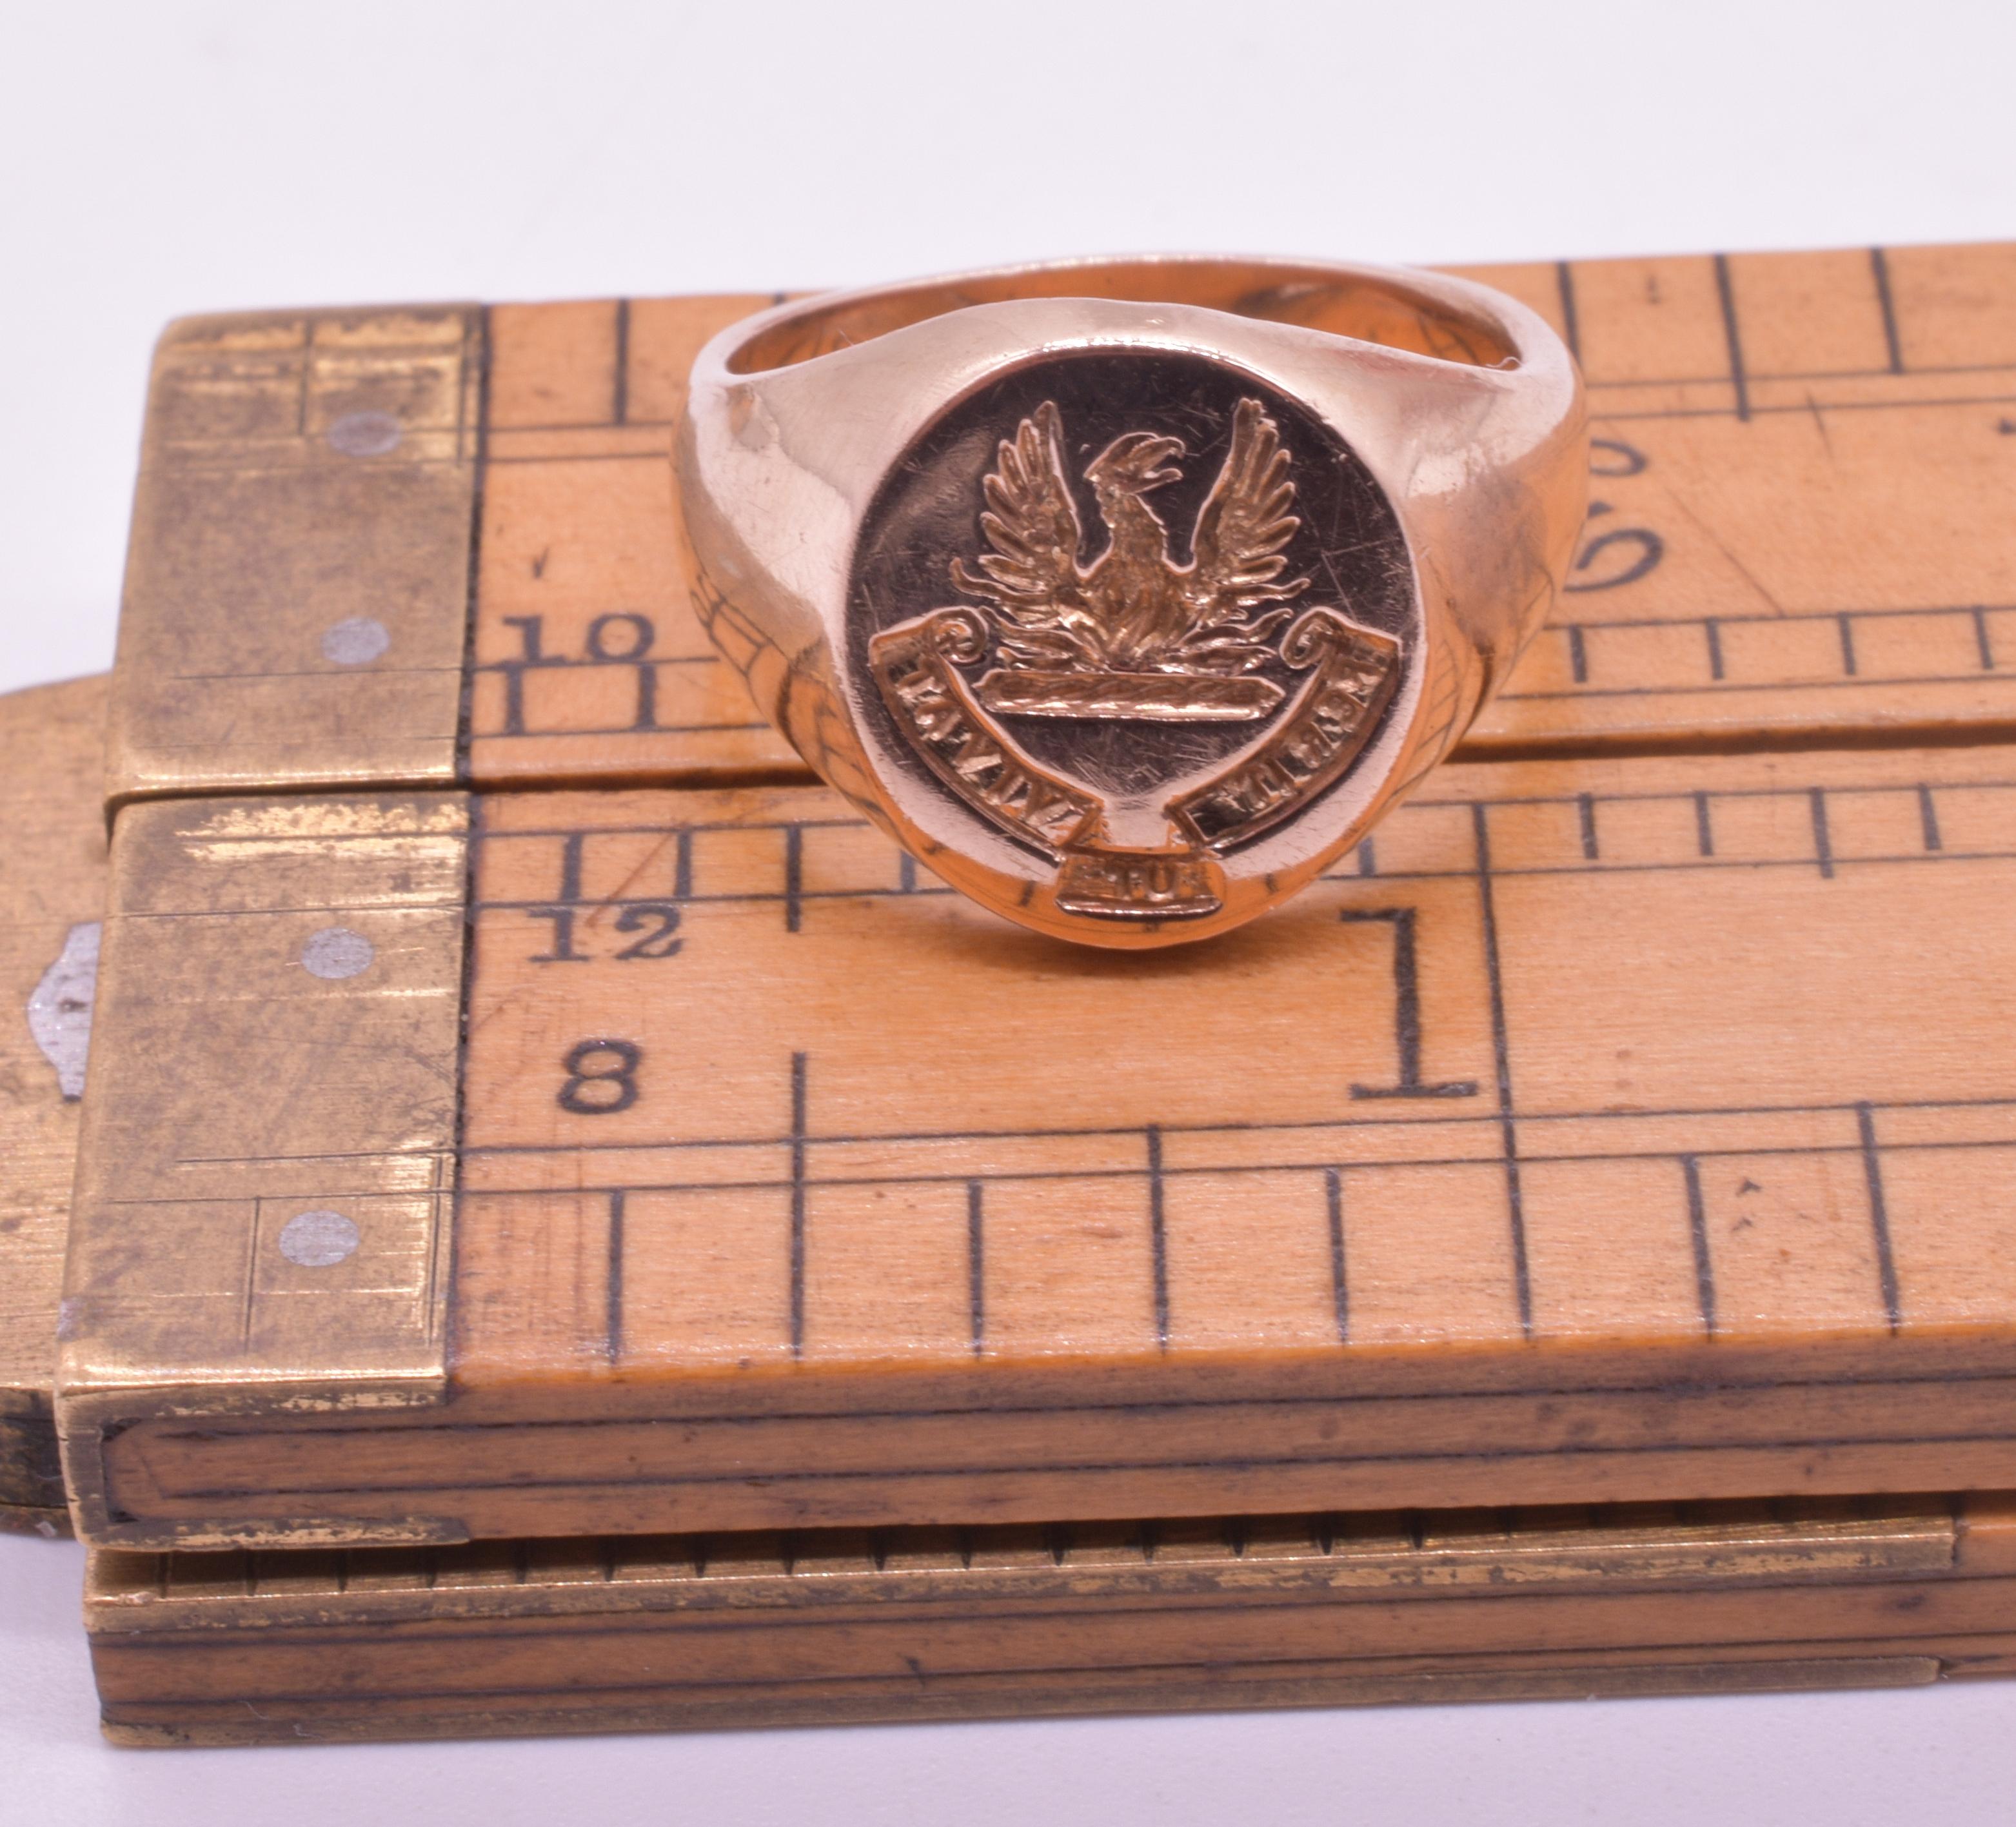 Victorian Signet Ring with Image of Phoenix, 